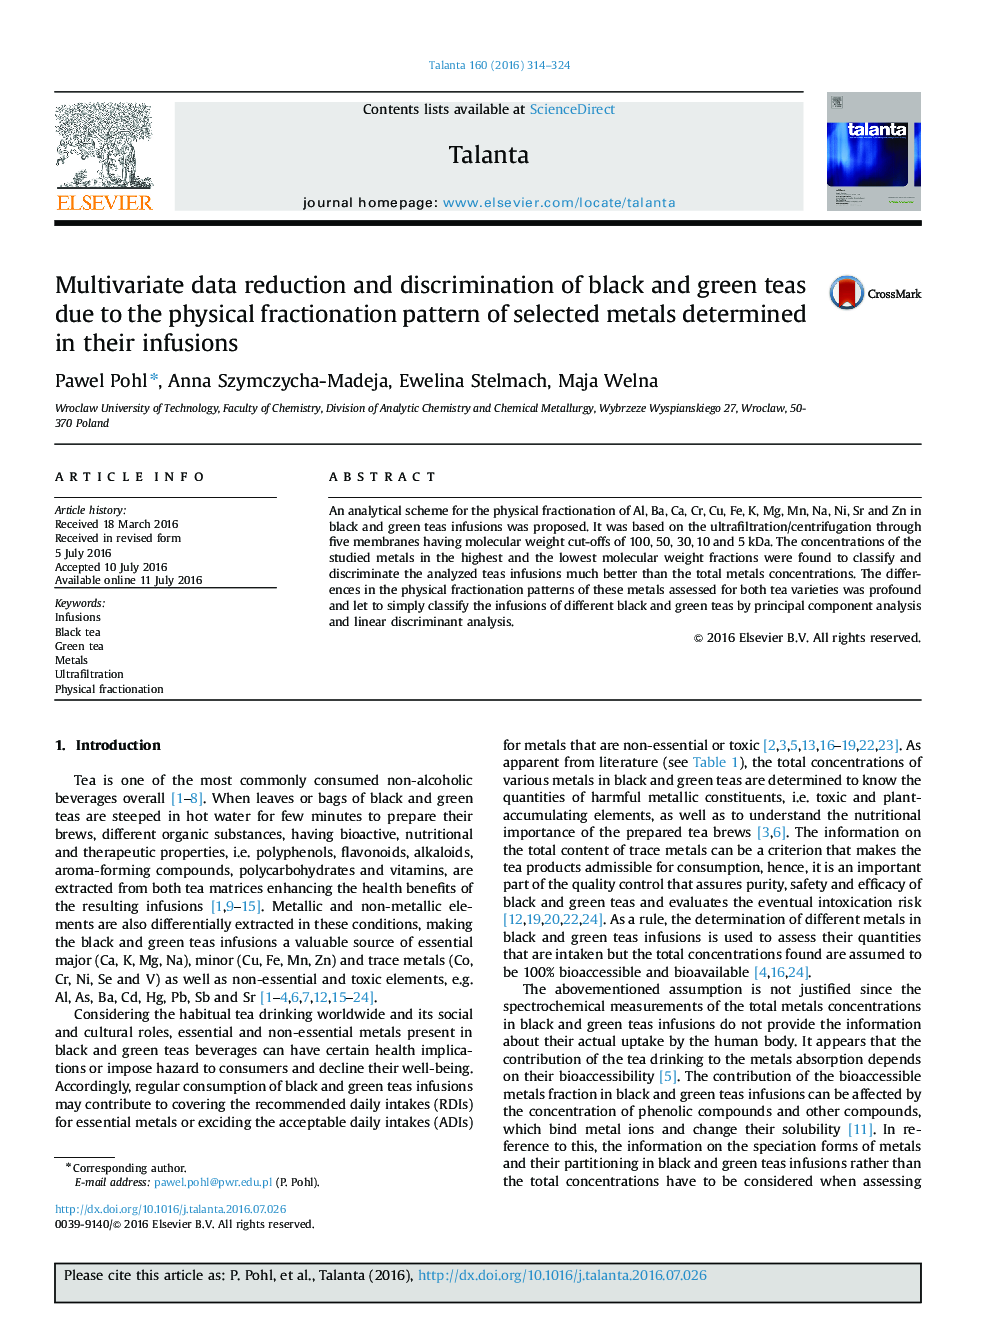 Multivariate data reduction and discrimination of black and green teas due to the physical fractionation pattern of selected metals determined in their infusions